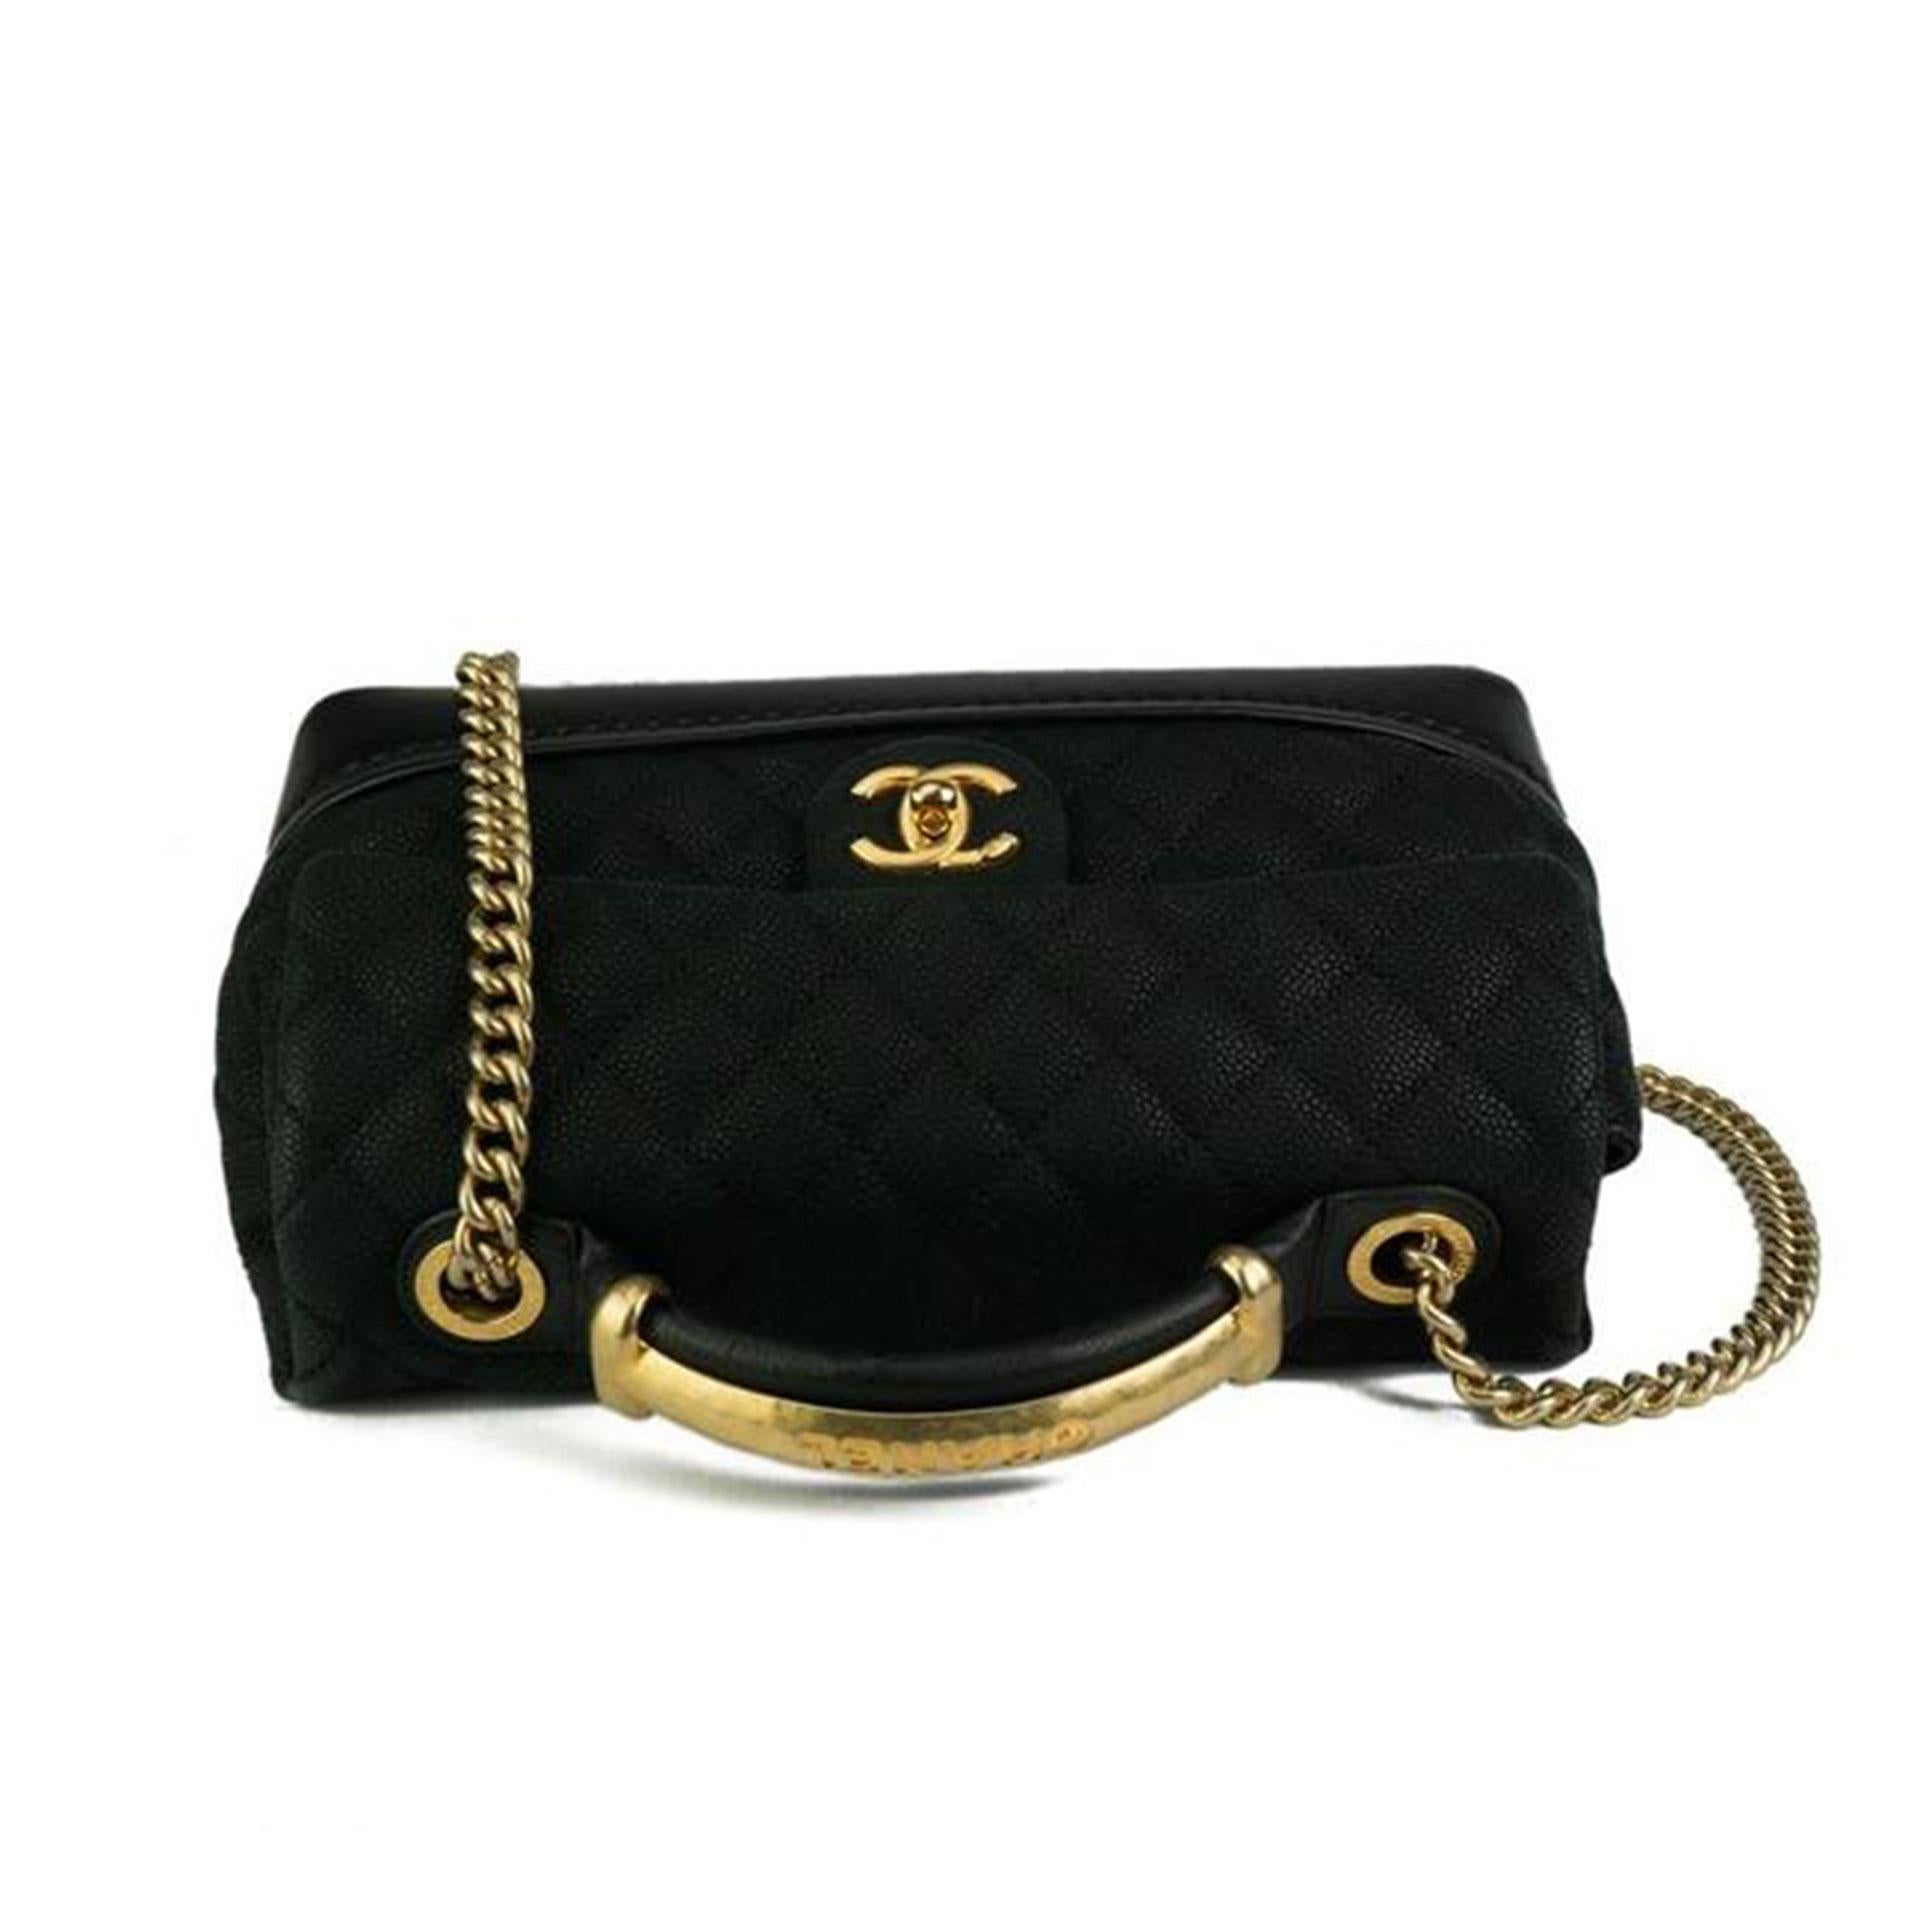 Chanel 2013 Cruise Iridescent Caviar Kelly Top Handle Crossbody Classic Flap Bag In Good Condition For Sale In Miami, FL